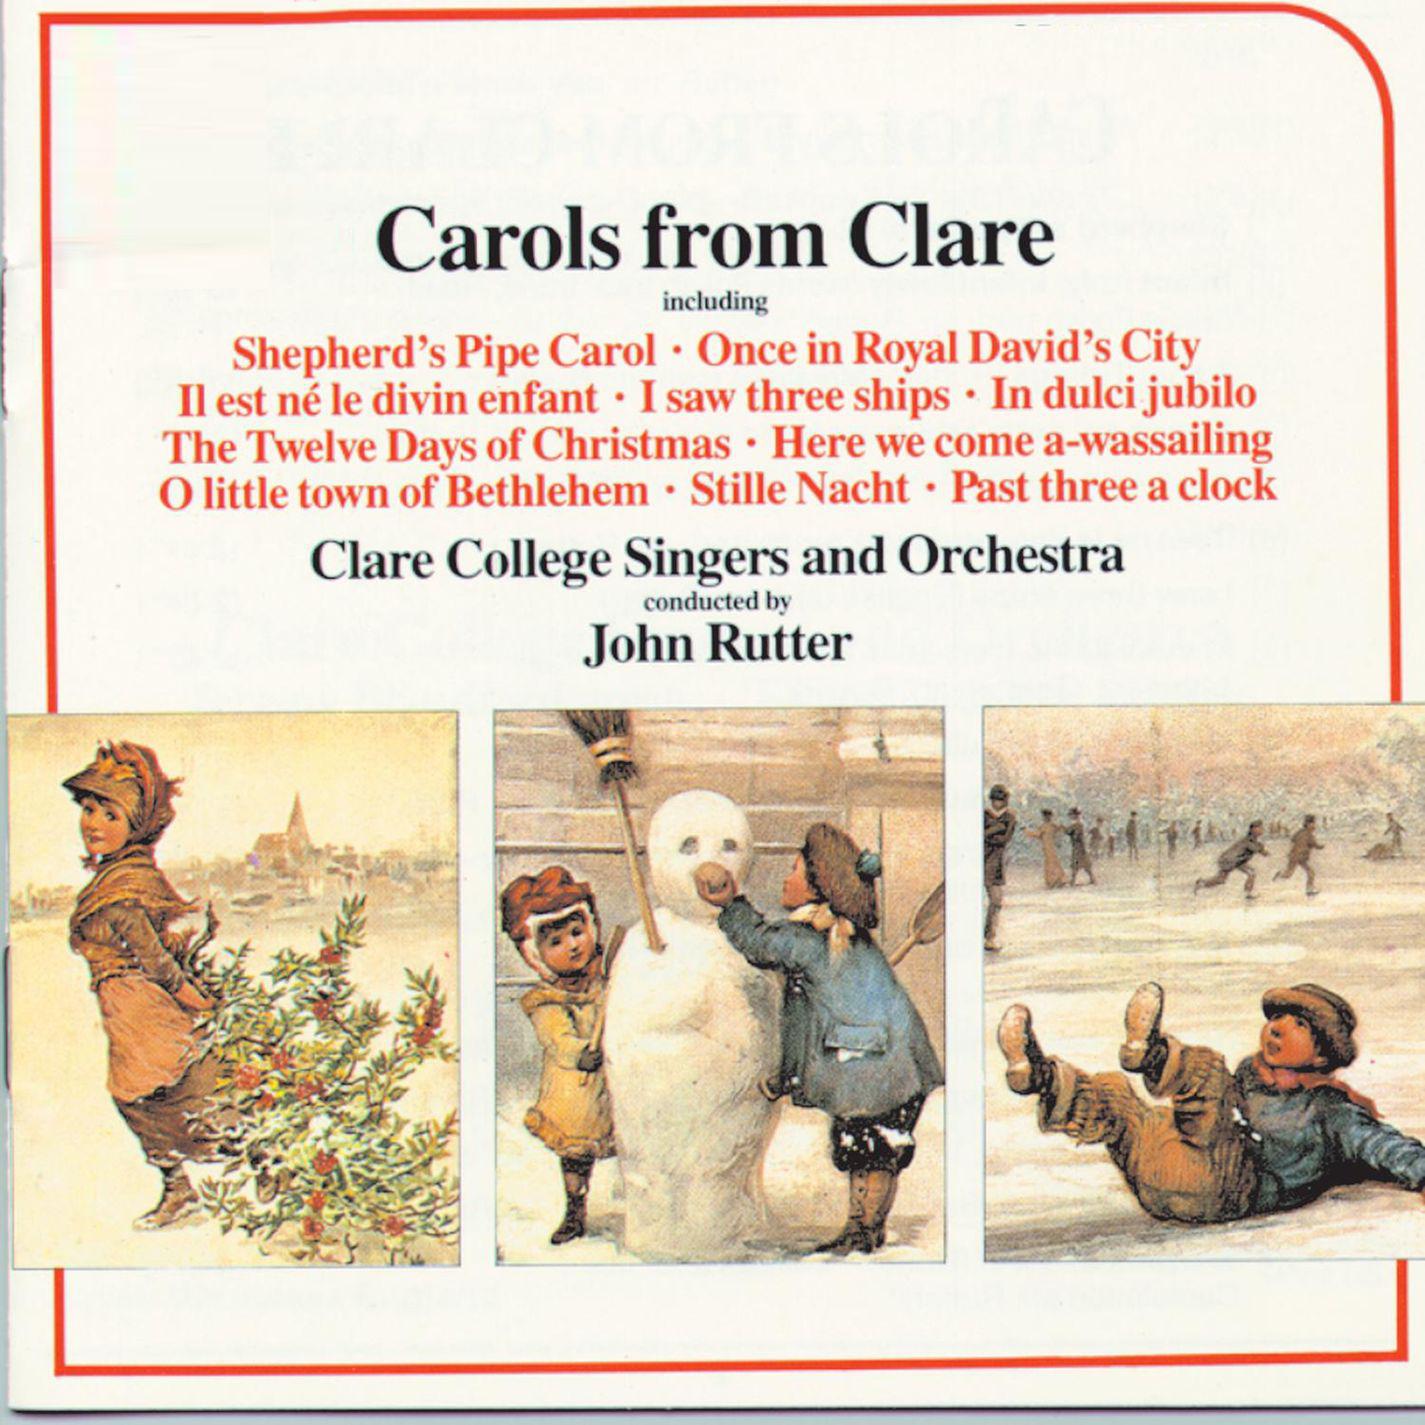 Carols from Clare